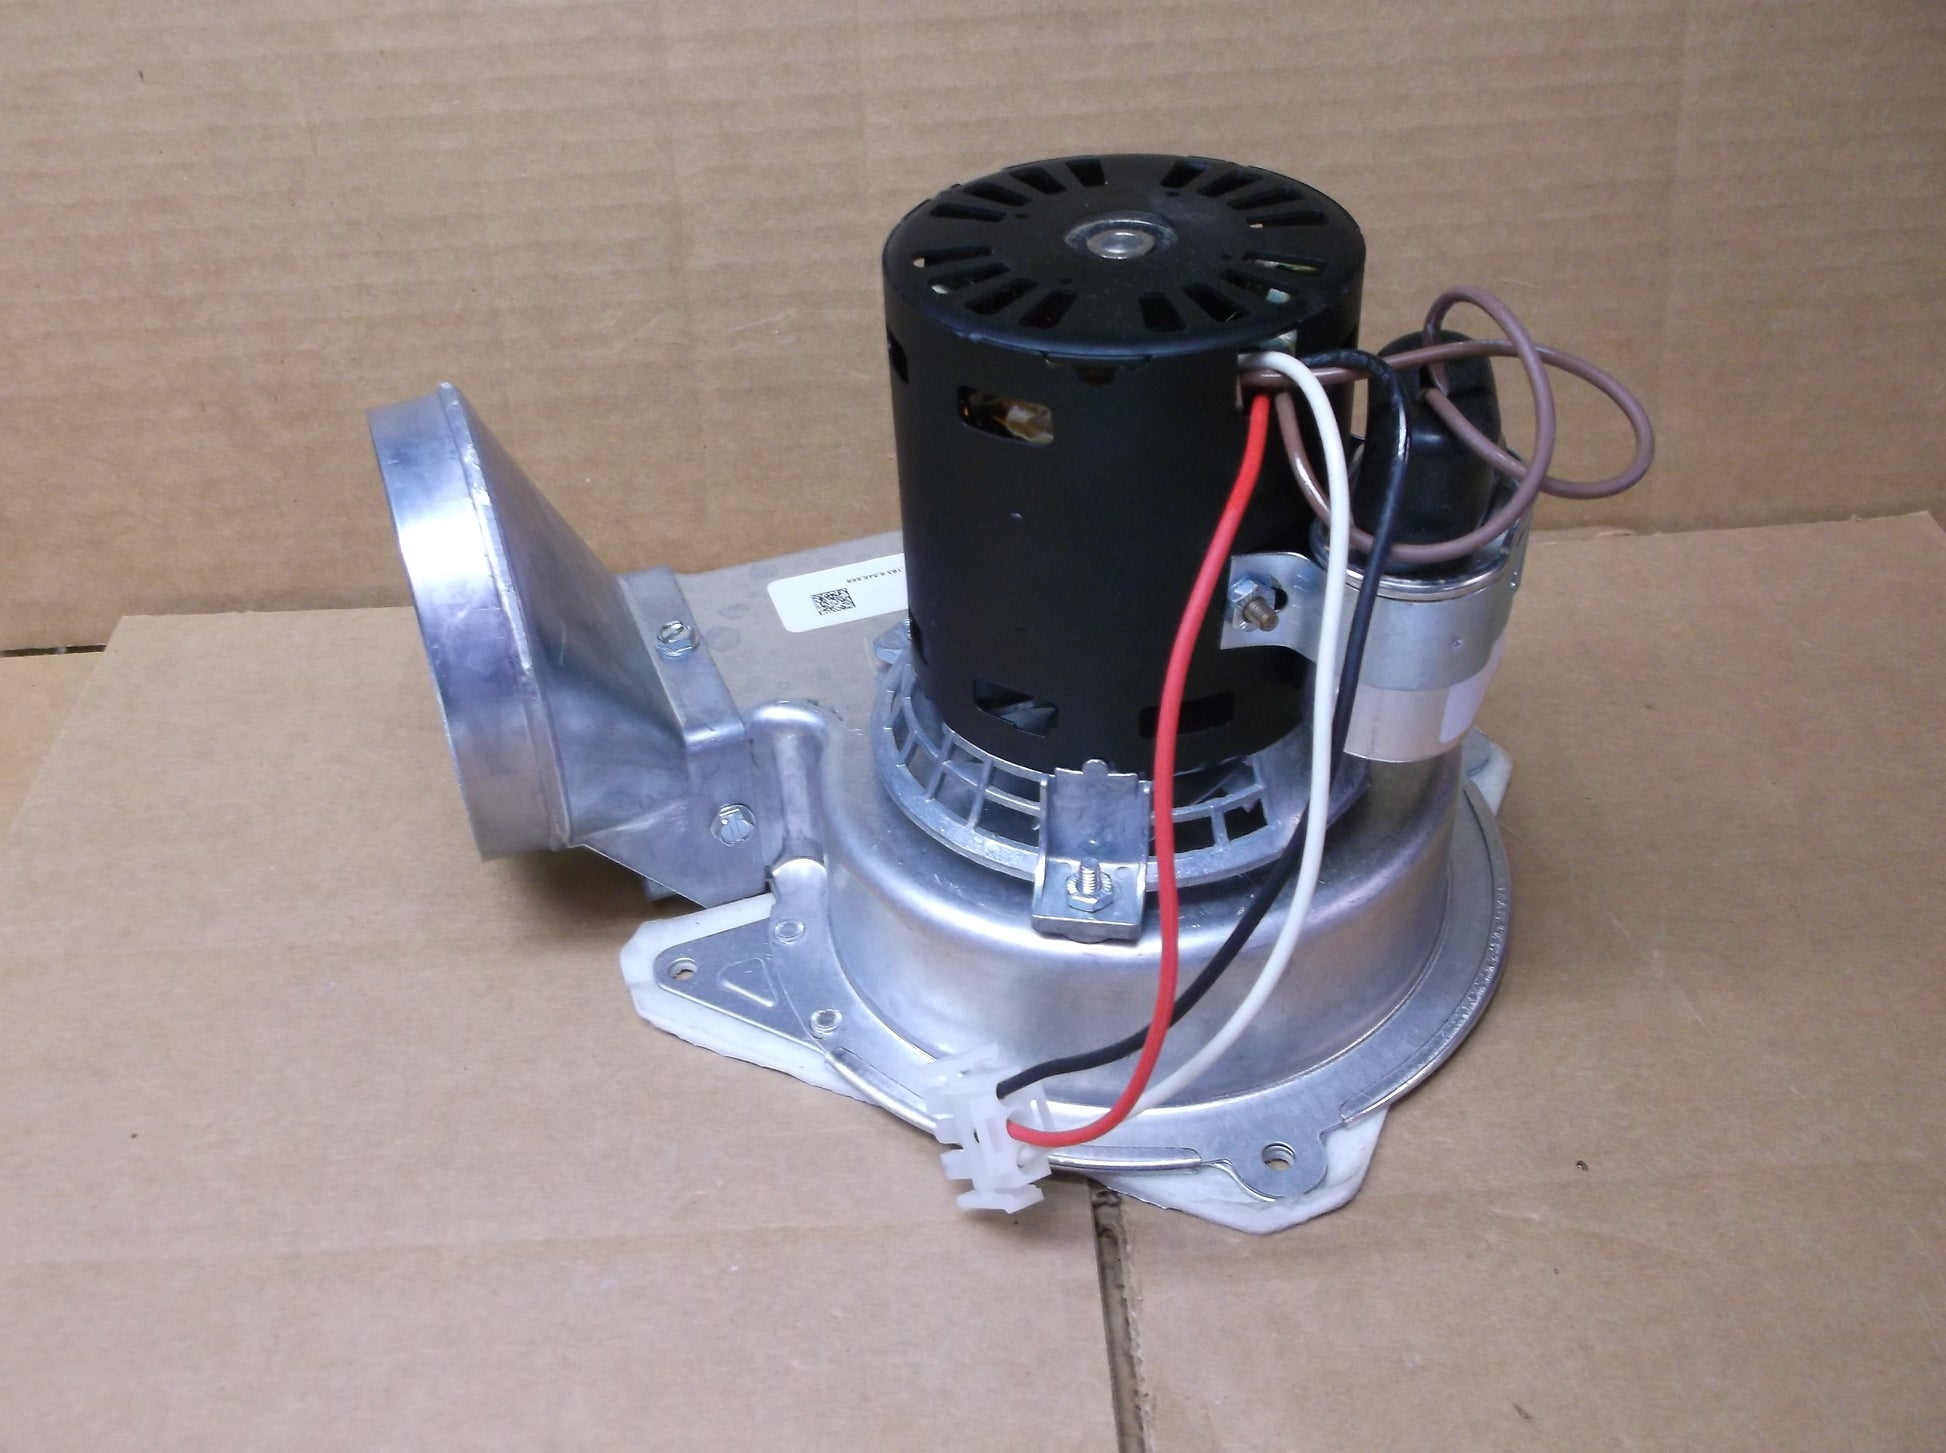 DRAFT INDUCER BLOWER ASSEMBLY 2-STAGE  VOLTAGE:120,HERTZ:60,RPM:3200/2700 2-SPEED